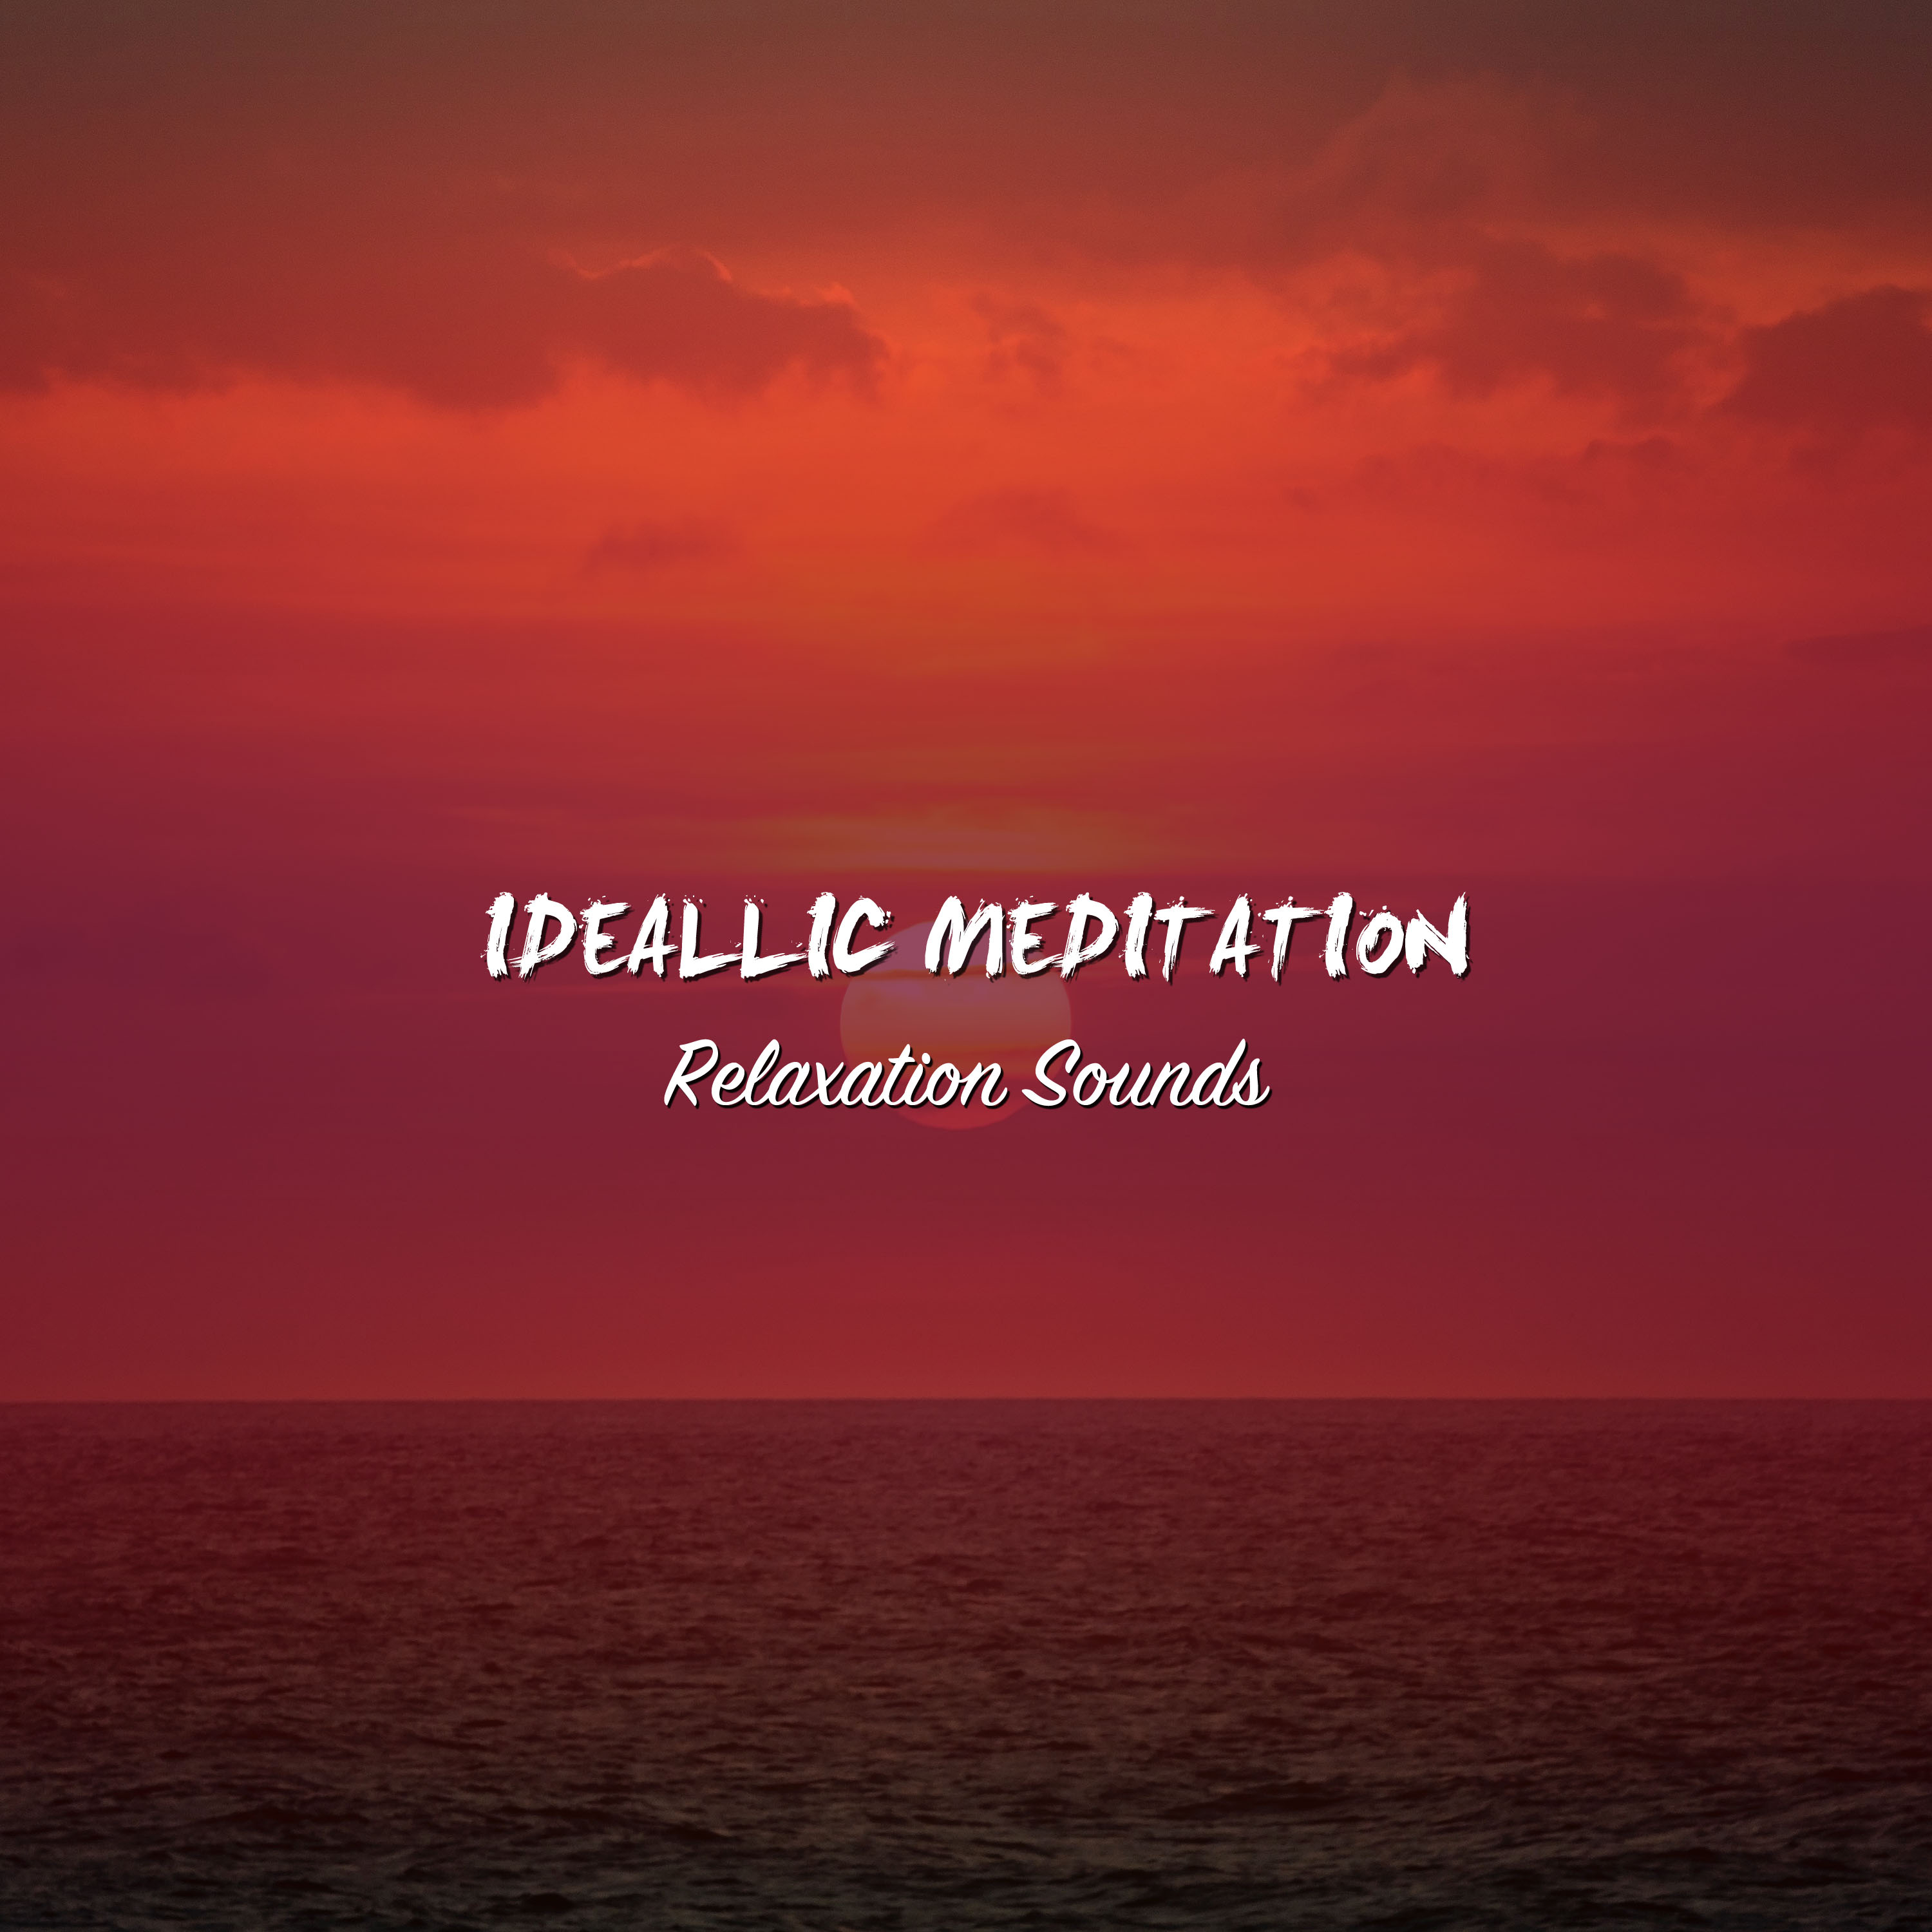 21 Ideallic Meditation and Relaxation Sounds